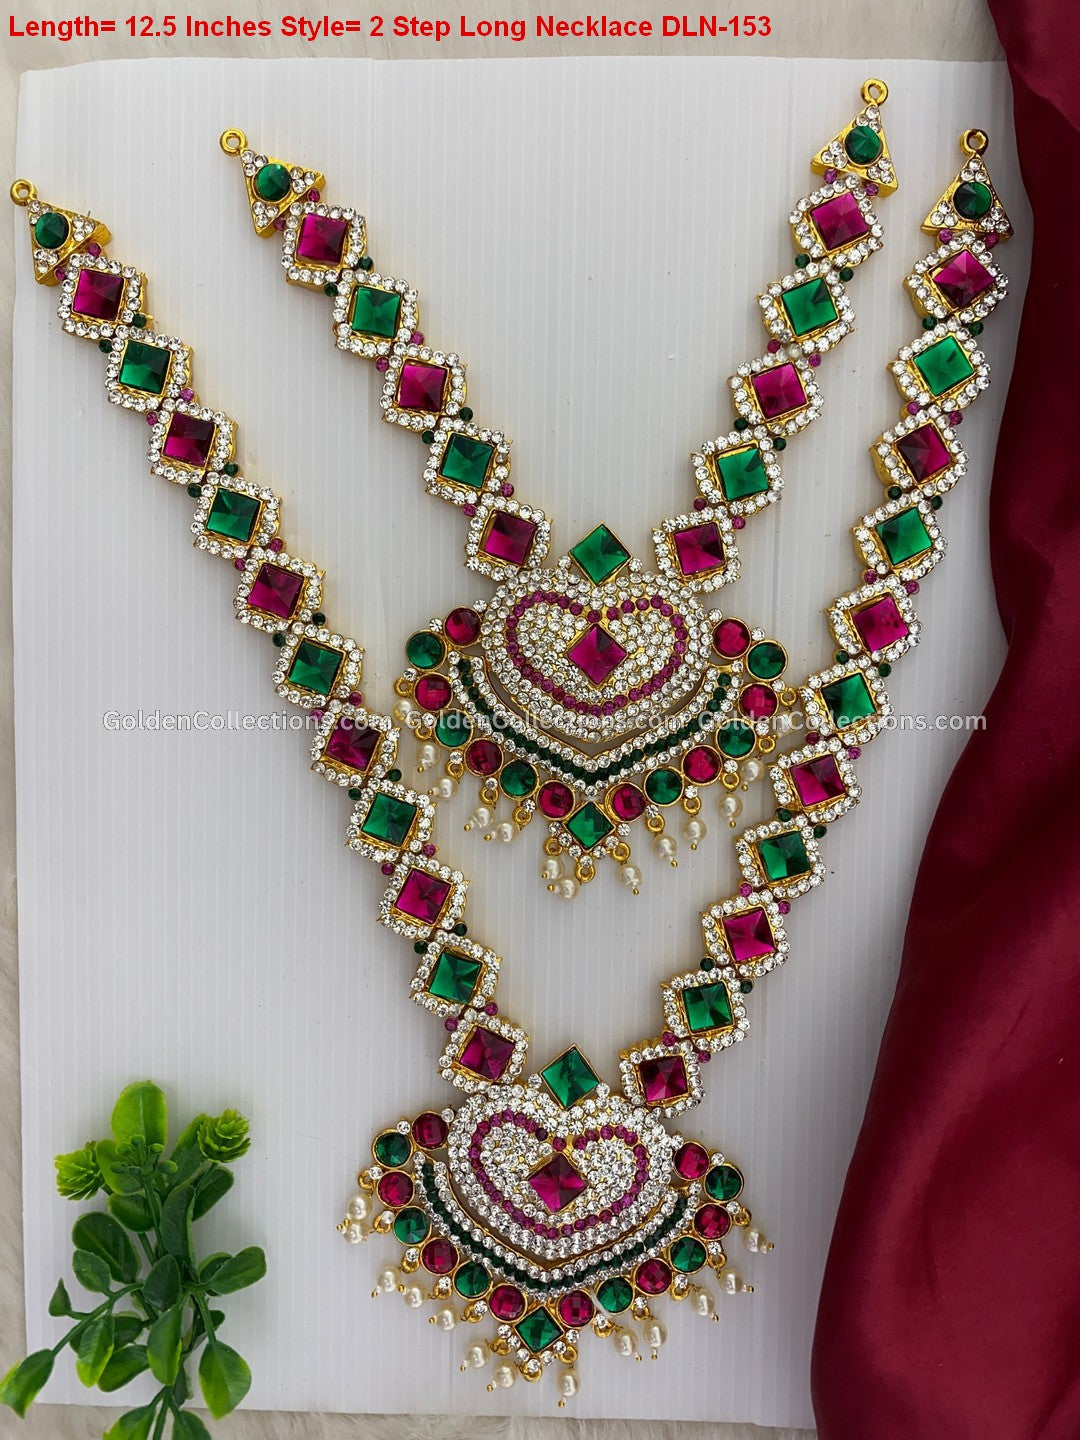 Long Necklace Set Collections: Complete Your Look Today! DLN-153